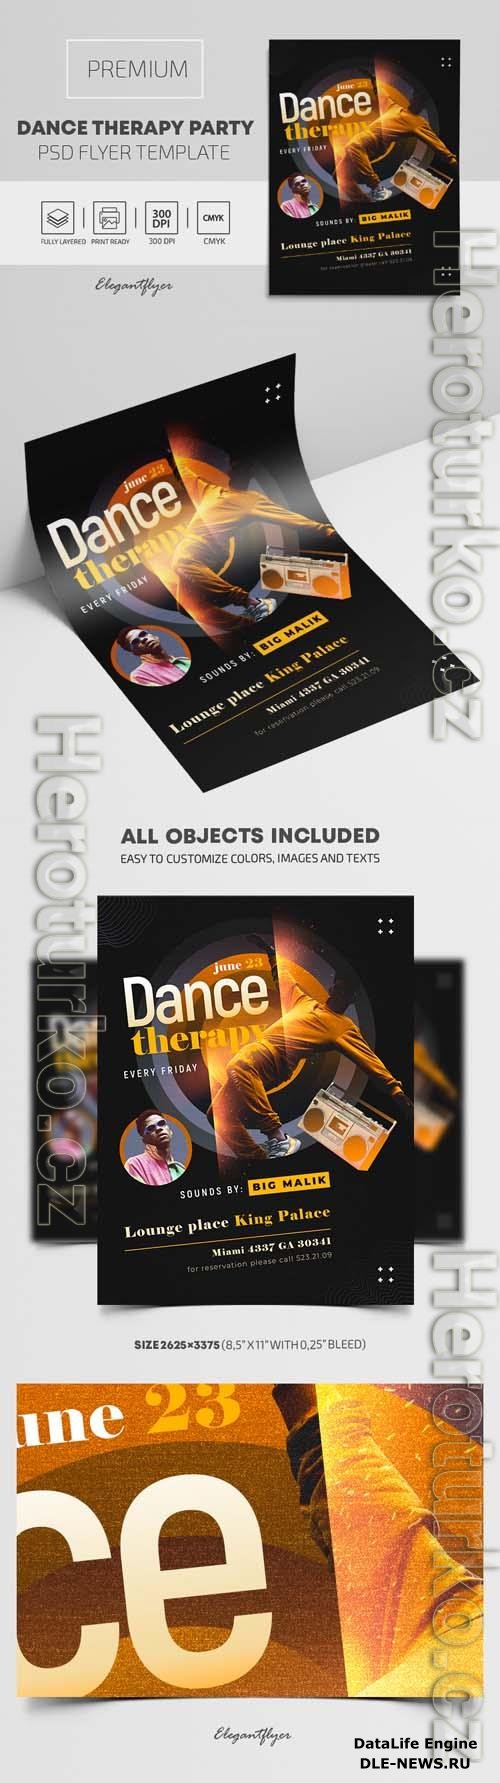 Dance Therapy Party Premium PSD Flyer Template